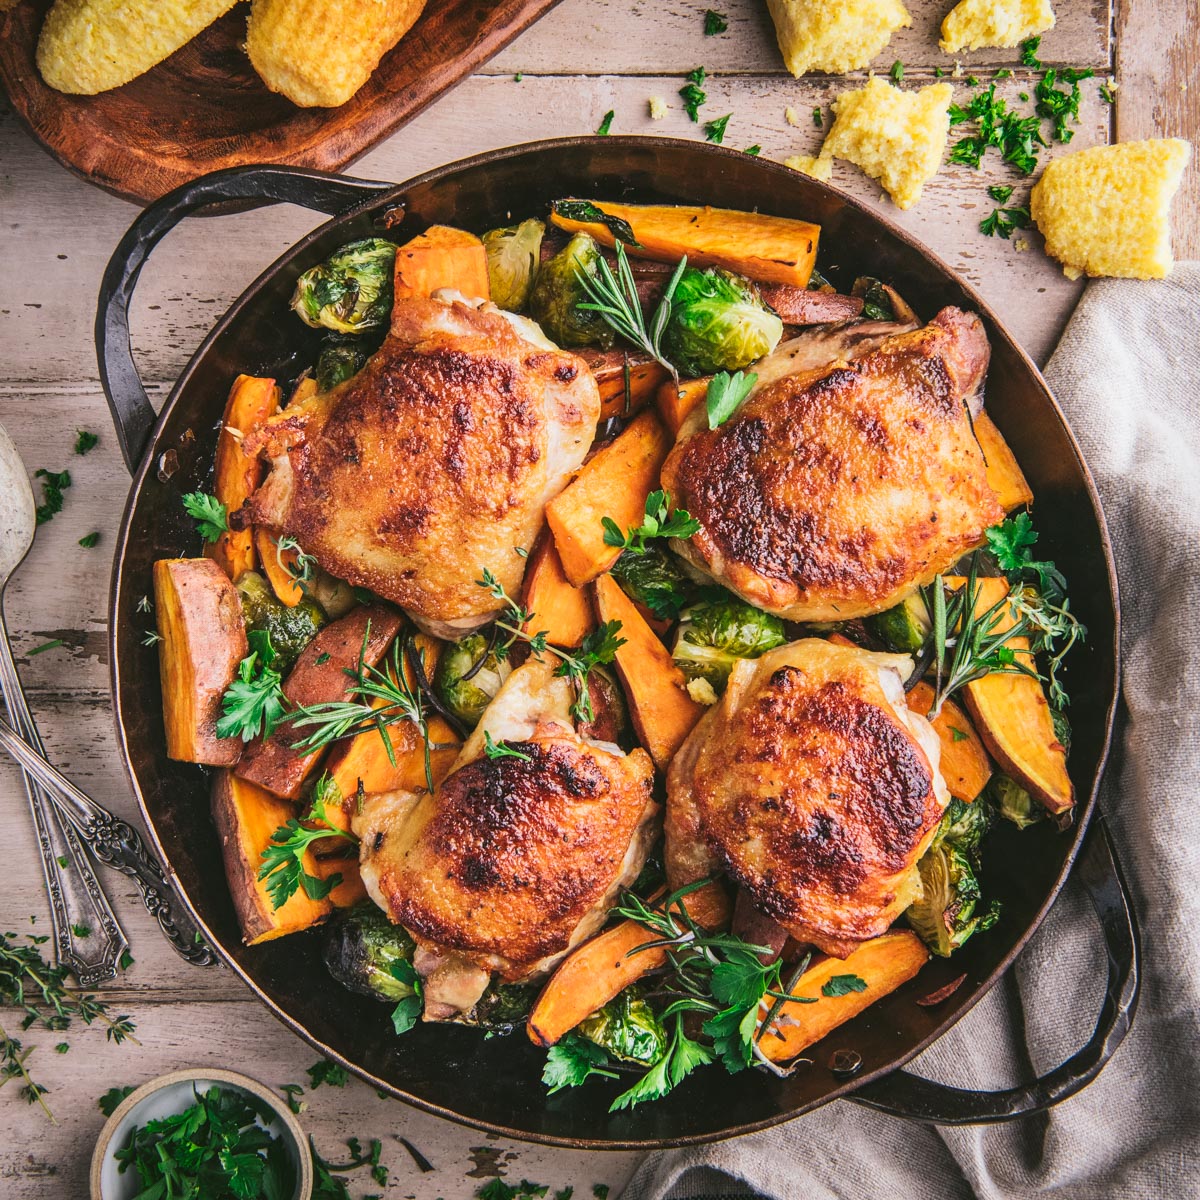 https://www.theseasonedmom.com/wp-content/uploads/2022/12/Maple-Roasted-Chicken-Thighs-with-Vegetables-5.jpg